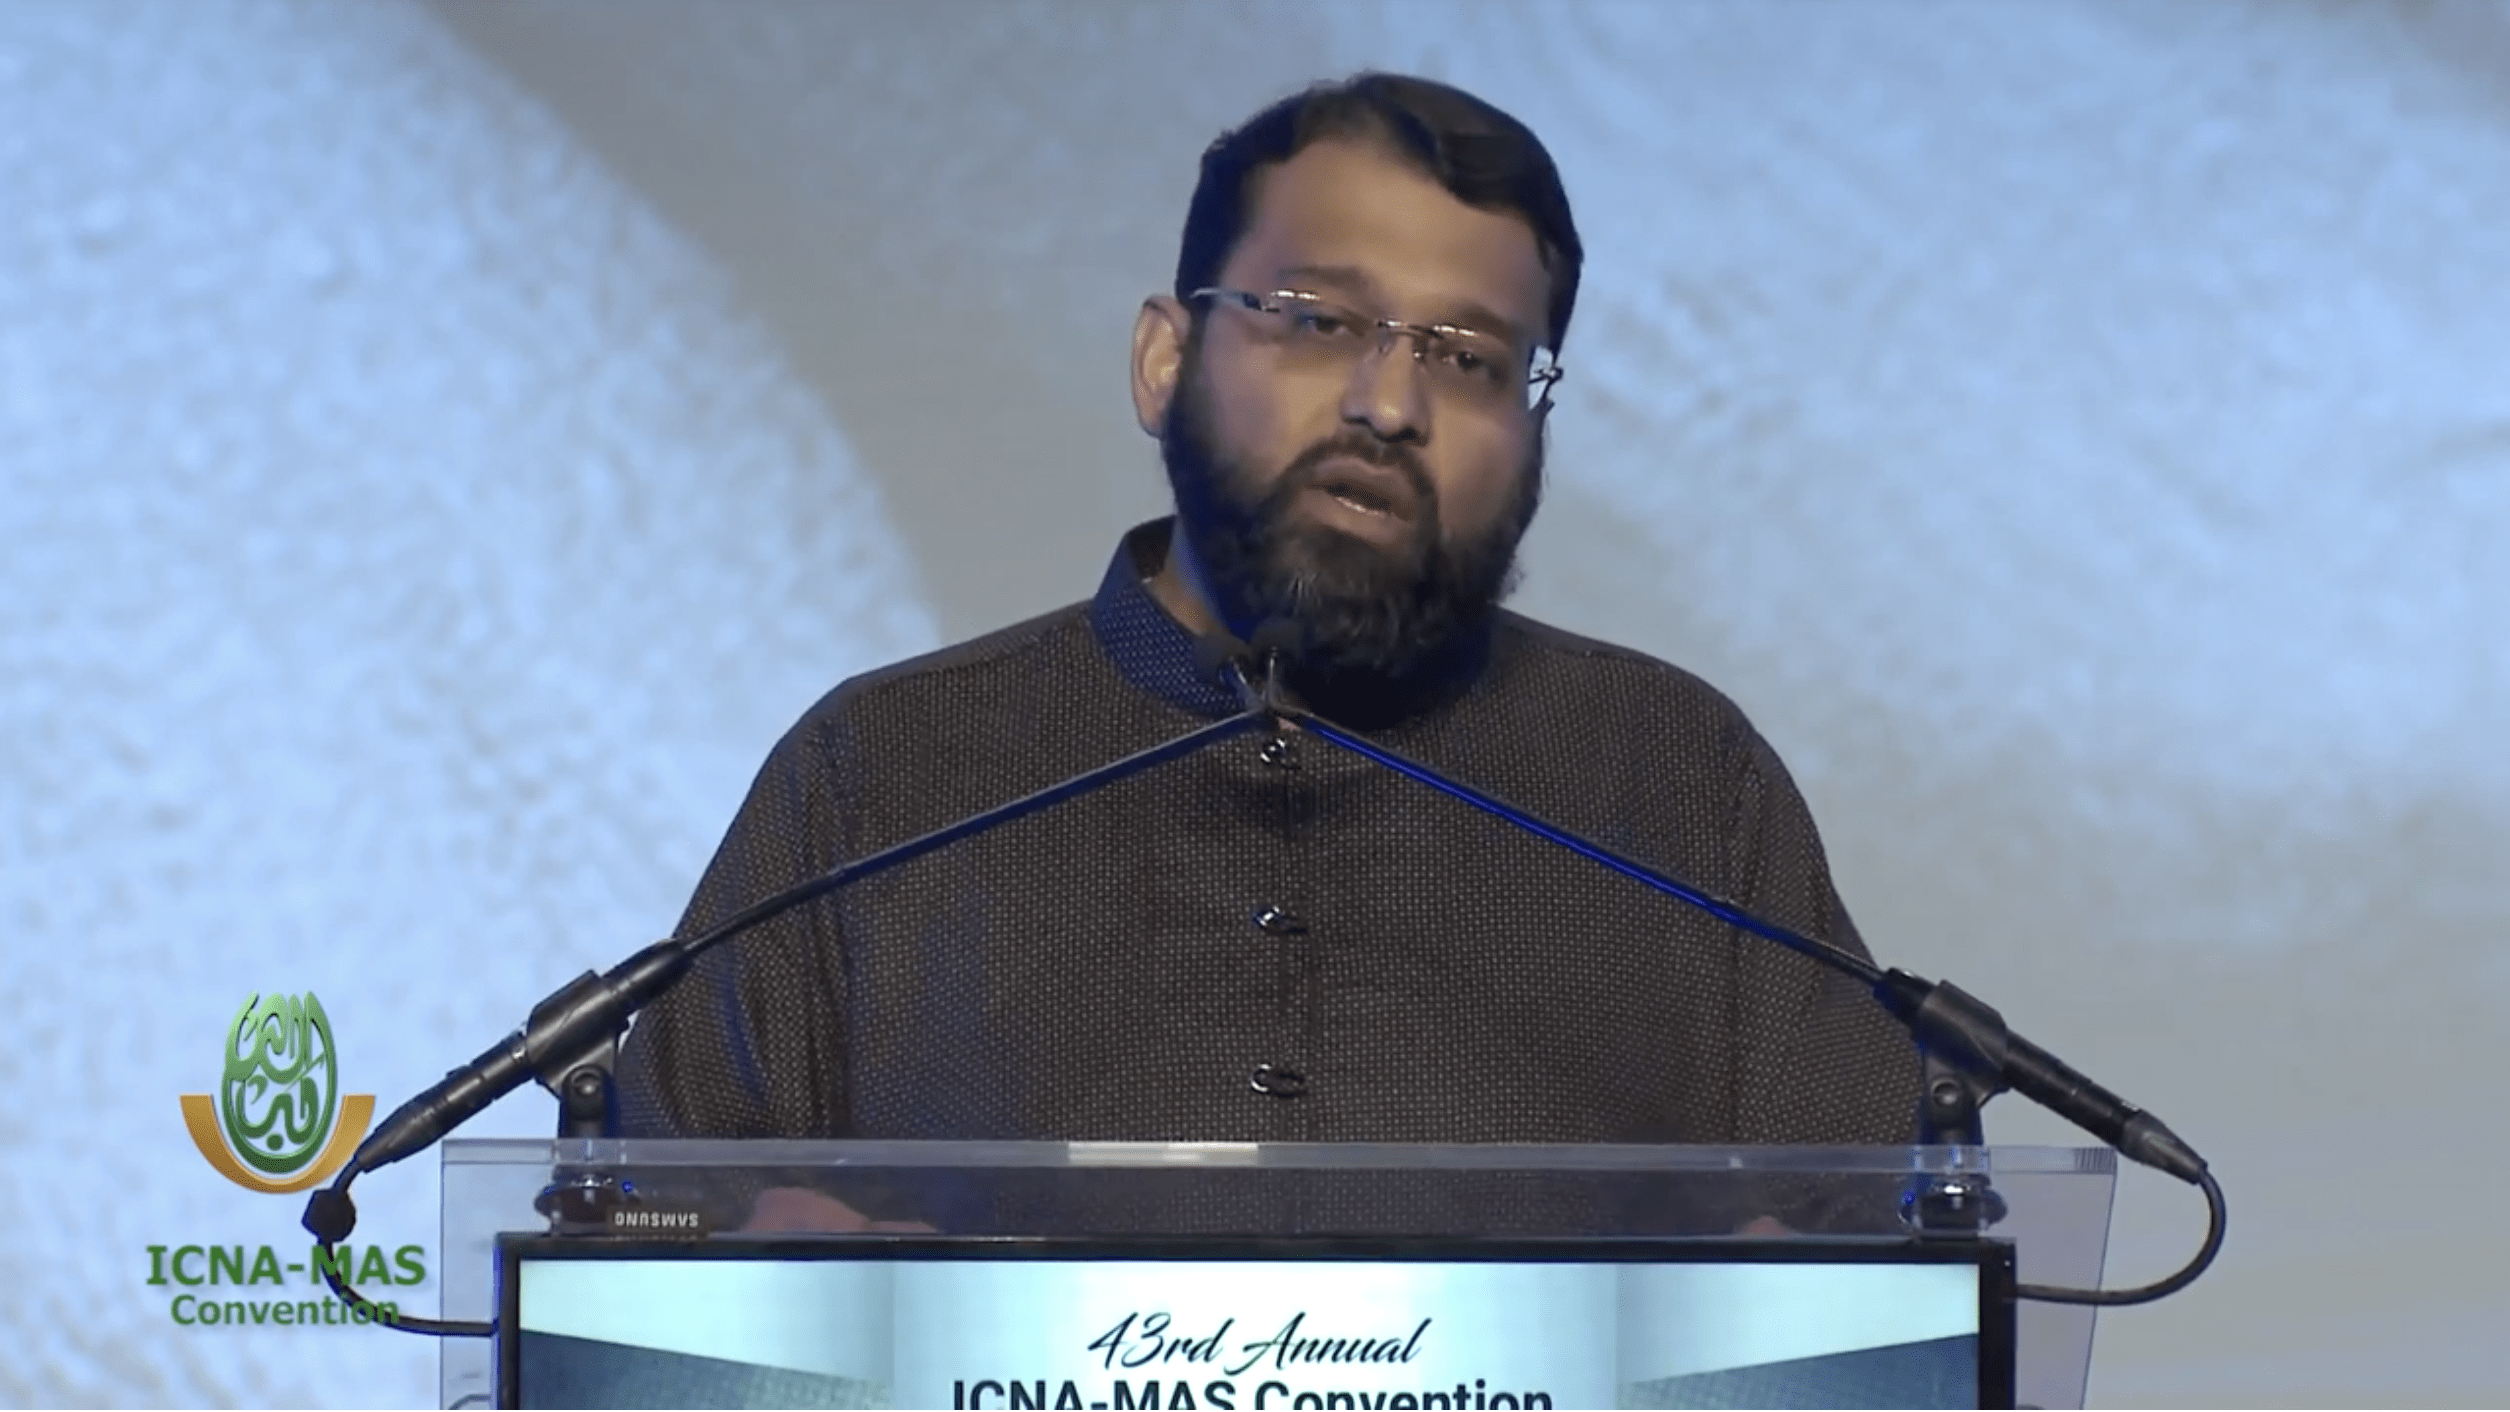 Yasir Qadhi – Why is there so much suffering in this world?